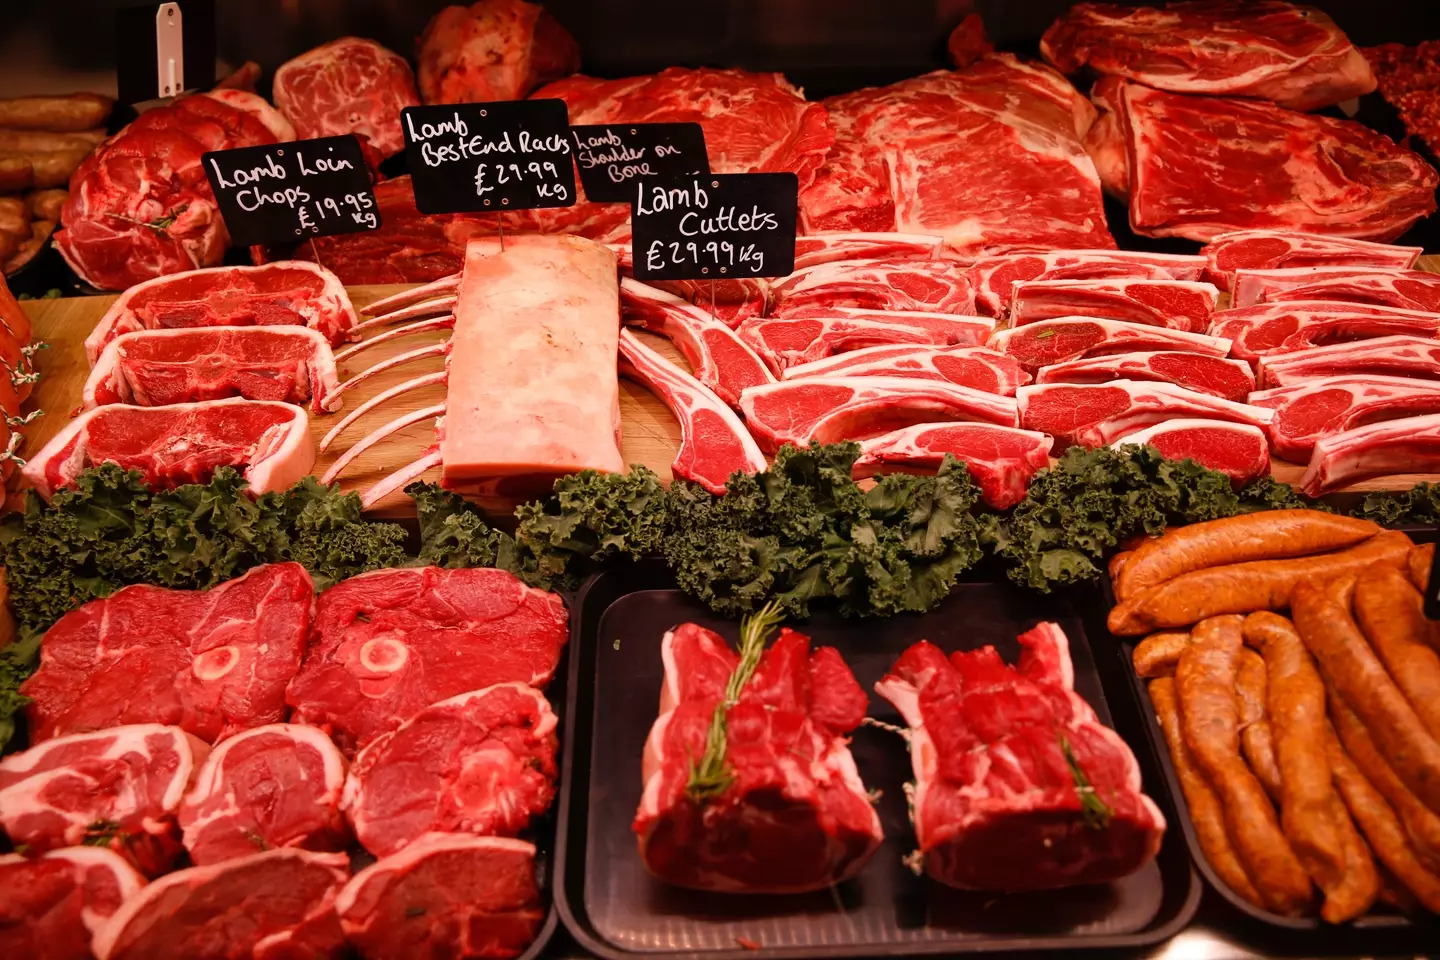 Red meat has been associated with Type 2 diabetes.